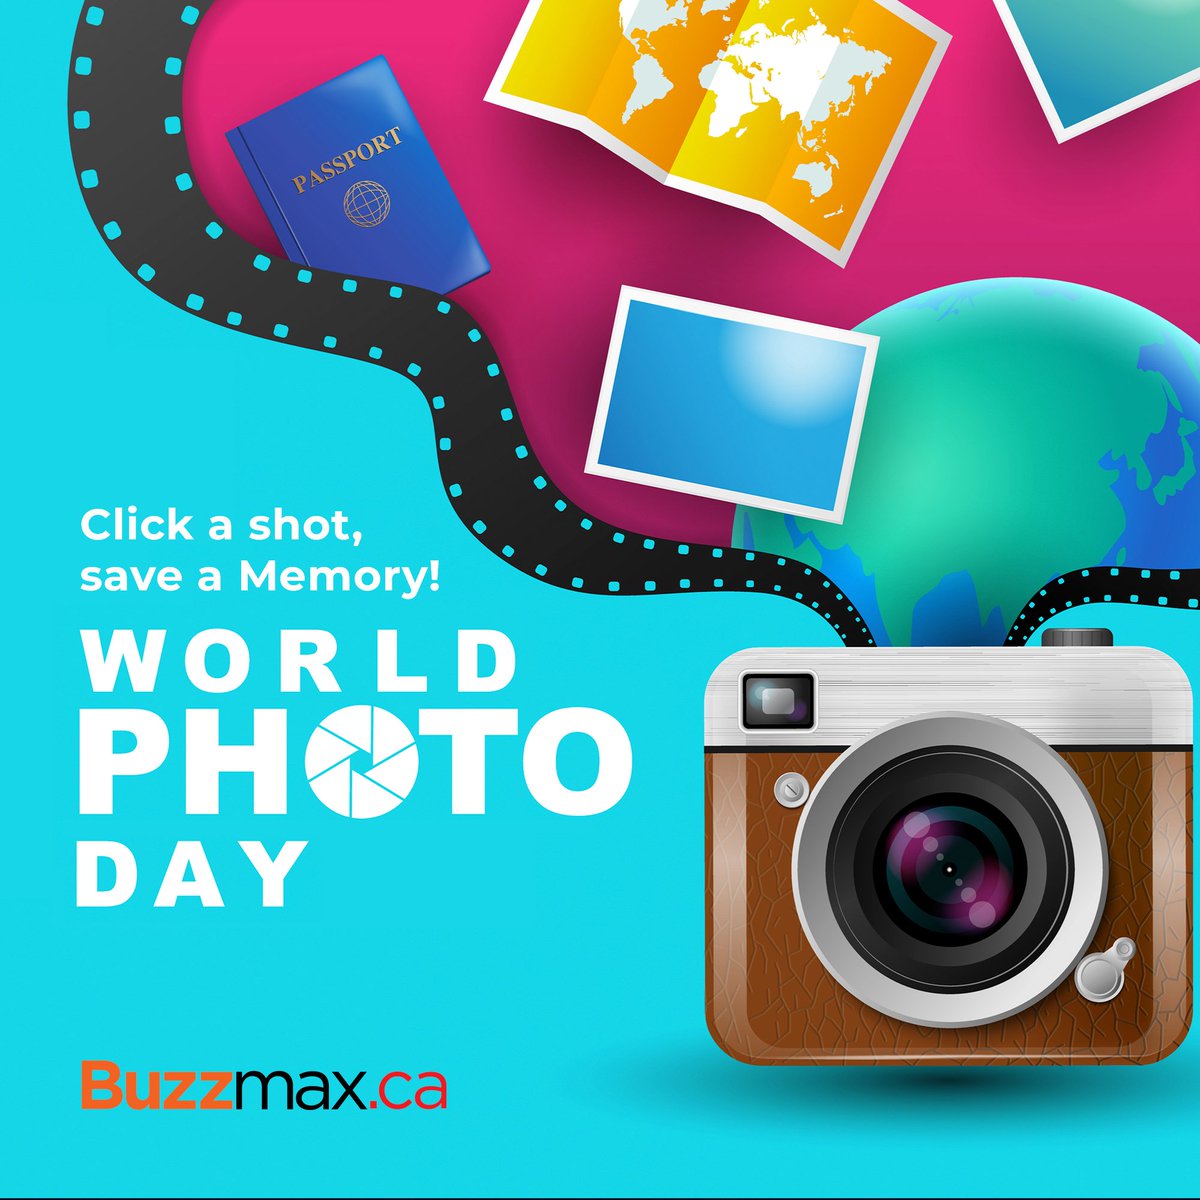 Celebrating the art of capturing moments that touch our hearts and live forever. 📸✨ Join us in cherishing memories on this special Photo Day. #CaptureTheMagic #PreserveMemories #Buzzmax #internetconnection #dsl